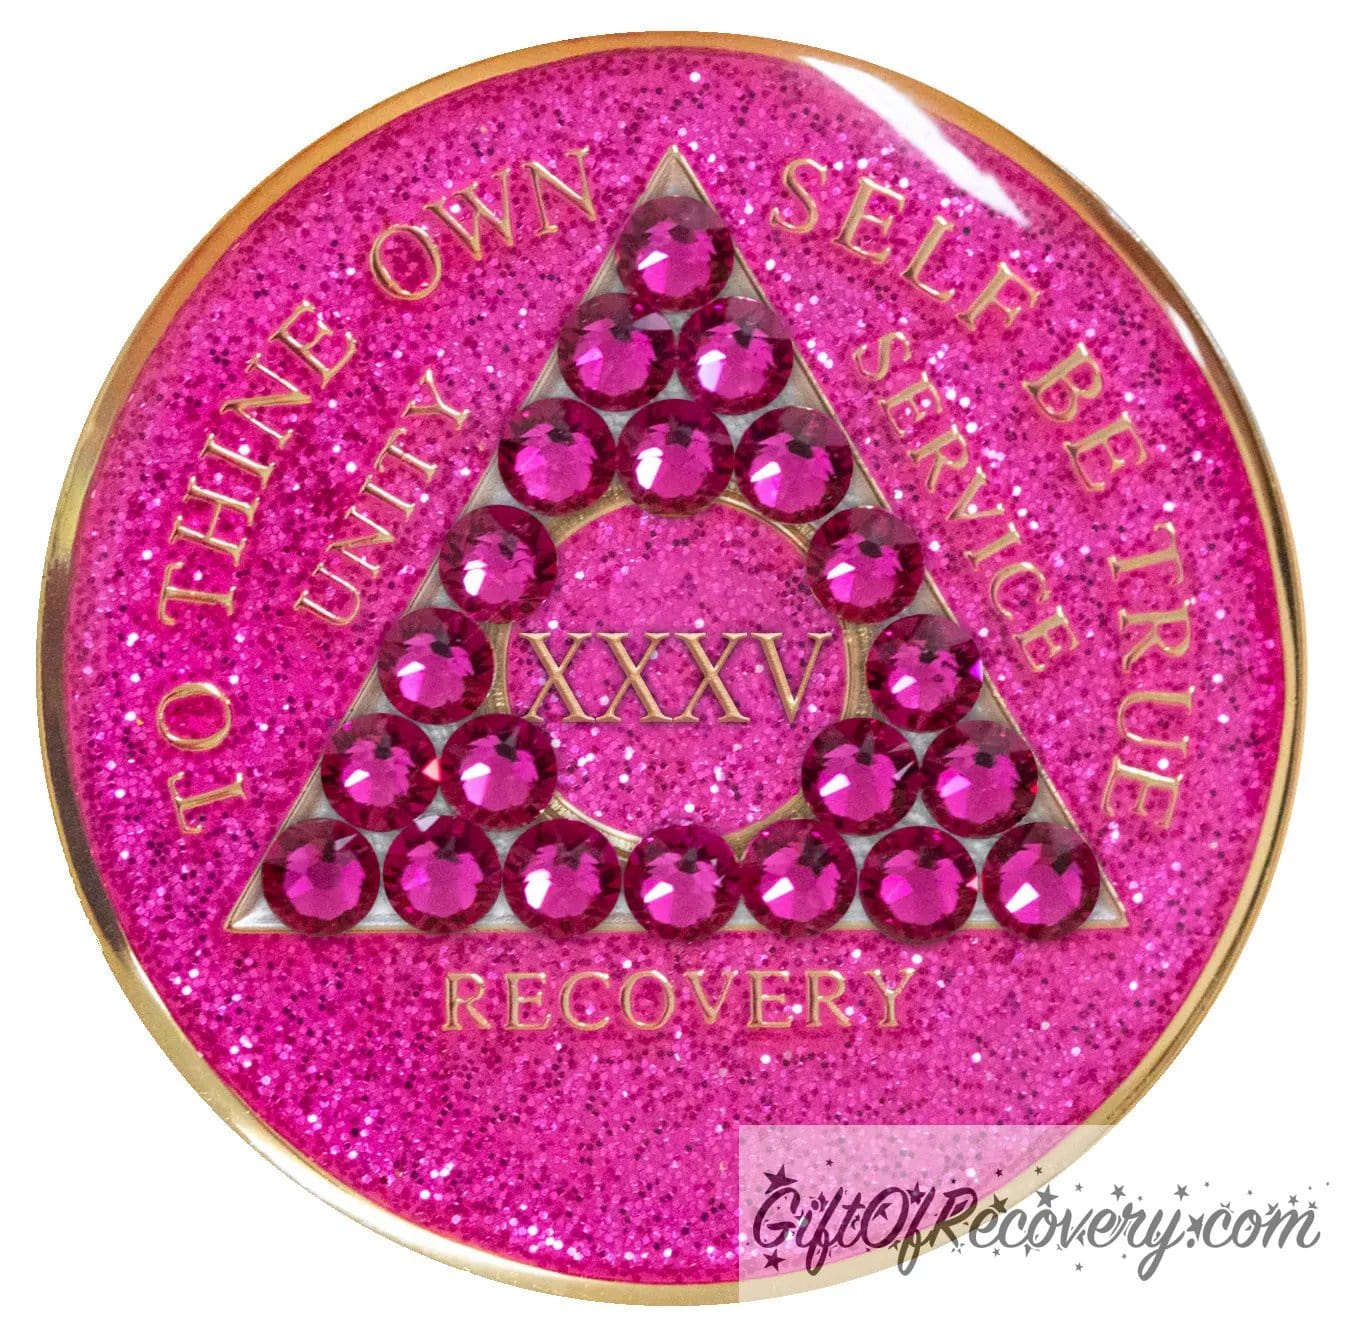 35 year Princess Pink Glitter AA medallion with 21 genuine fuchsia crystals in the shape of a triangle in the center of the recovery medallion, for your favorite sober princess, and to thine own self be true, unity, service, recovery, the roman numeral in the middle, and the outer rim, embossed in 14k plated brass, the aa medallion is sealed in resin for a shiny finish.